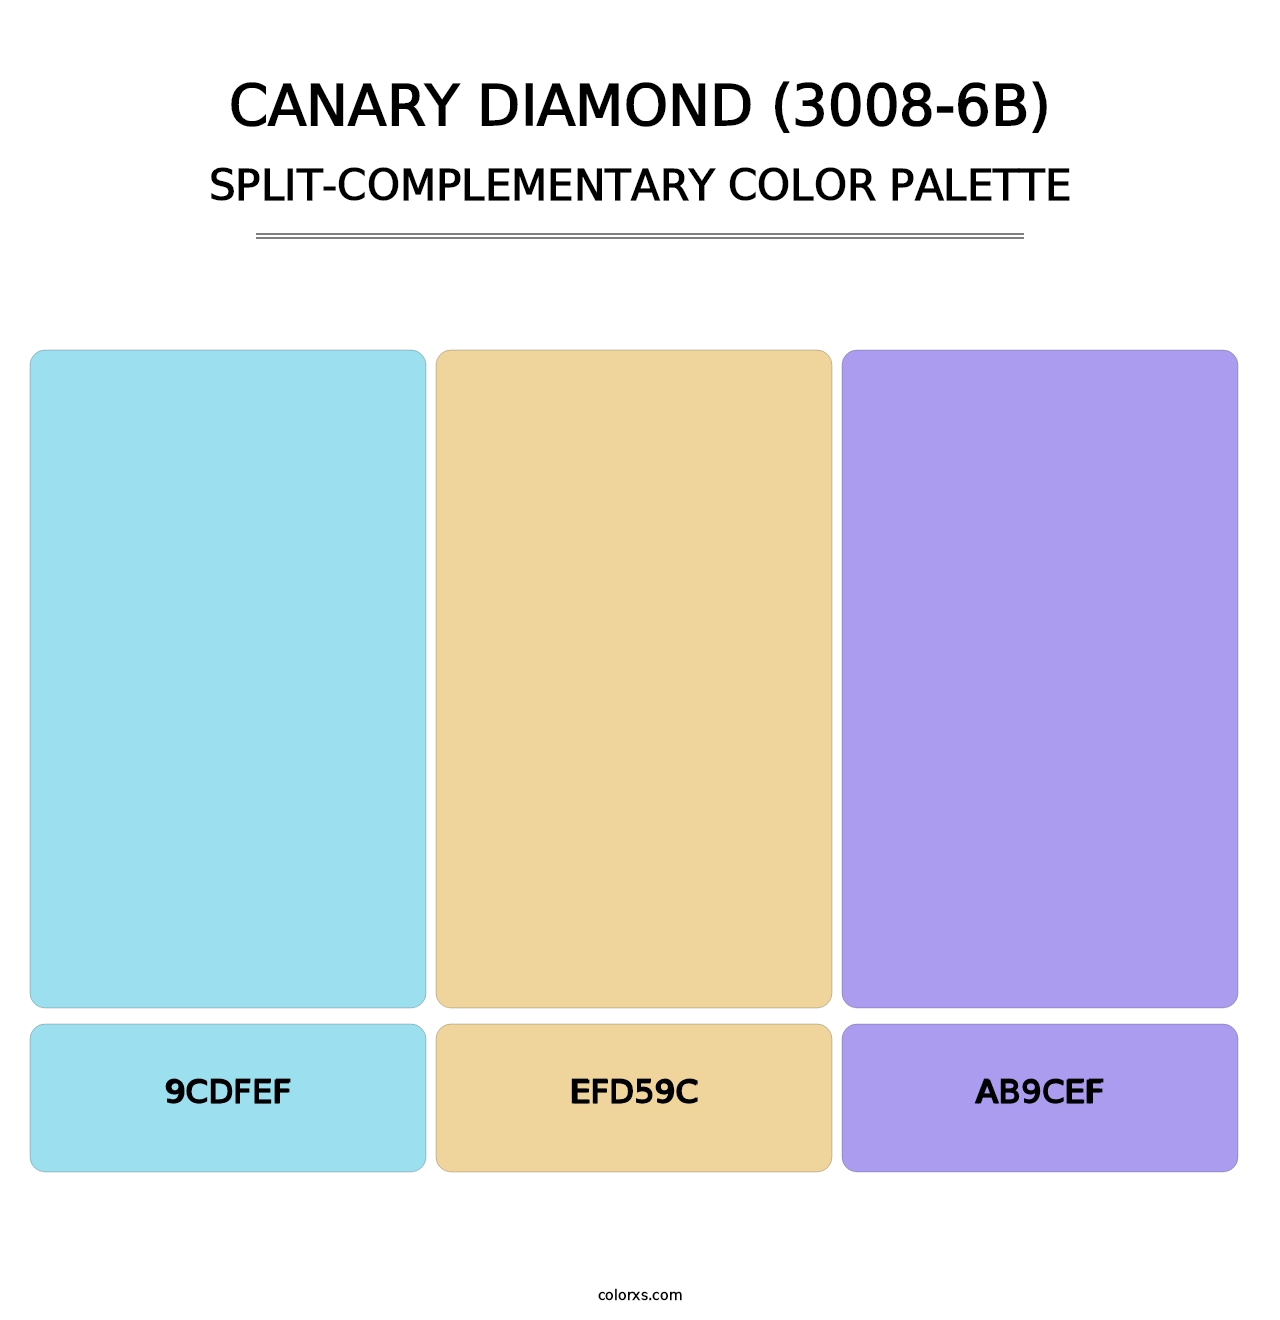 Canary Diamond (3008-6B) - Split-Complementary Color Palette